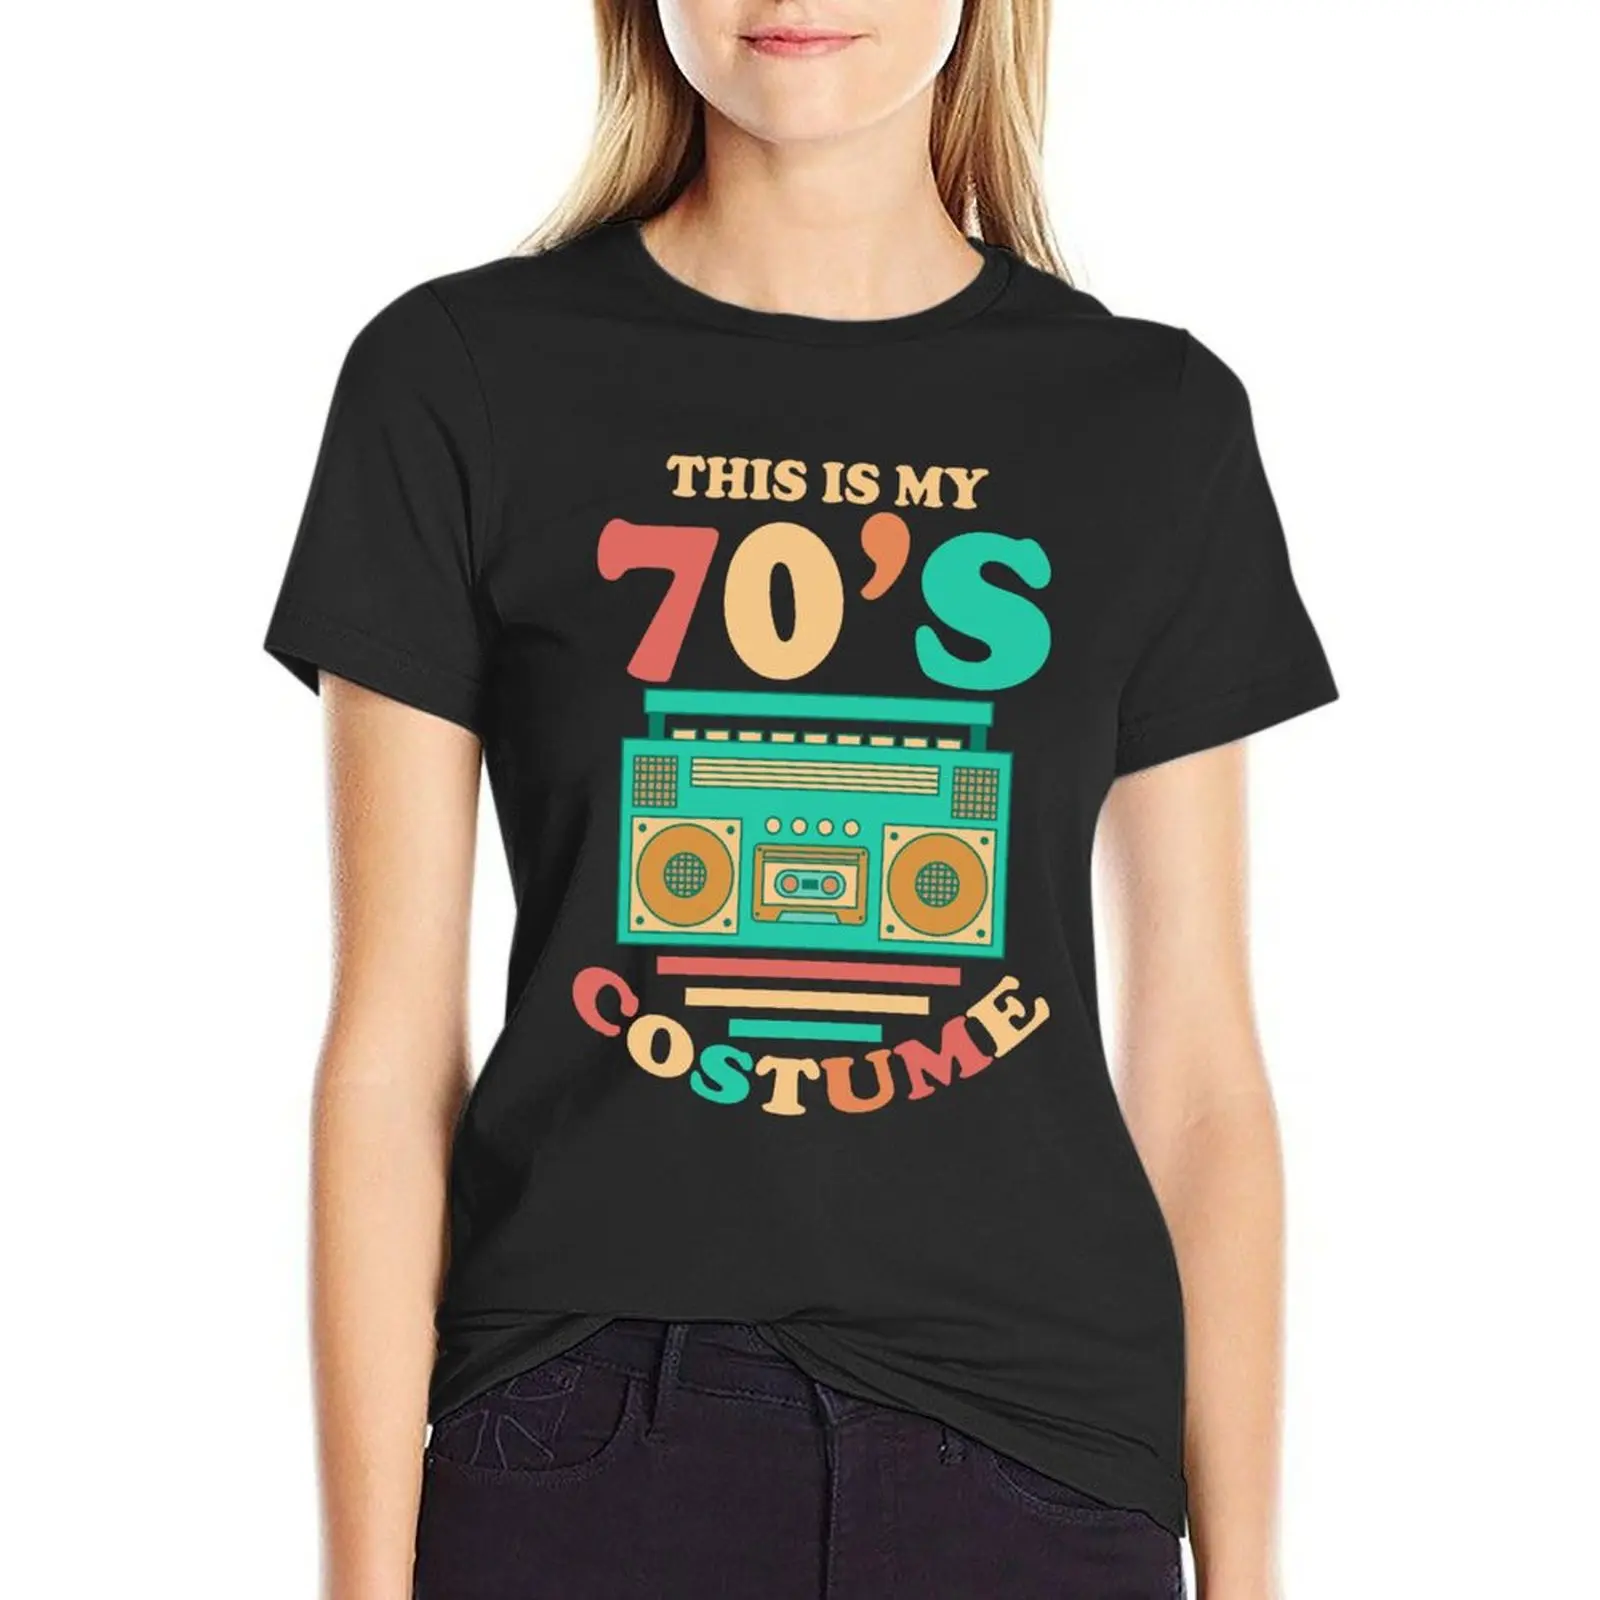 

This Is My 70s Costume Shirt 1970s Retro Vintage 70s Party T-shirt aesthetic clothes cute tops t-shirts for Women cotton